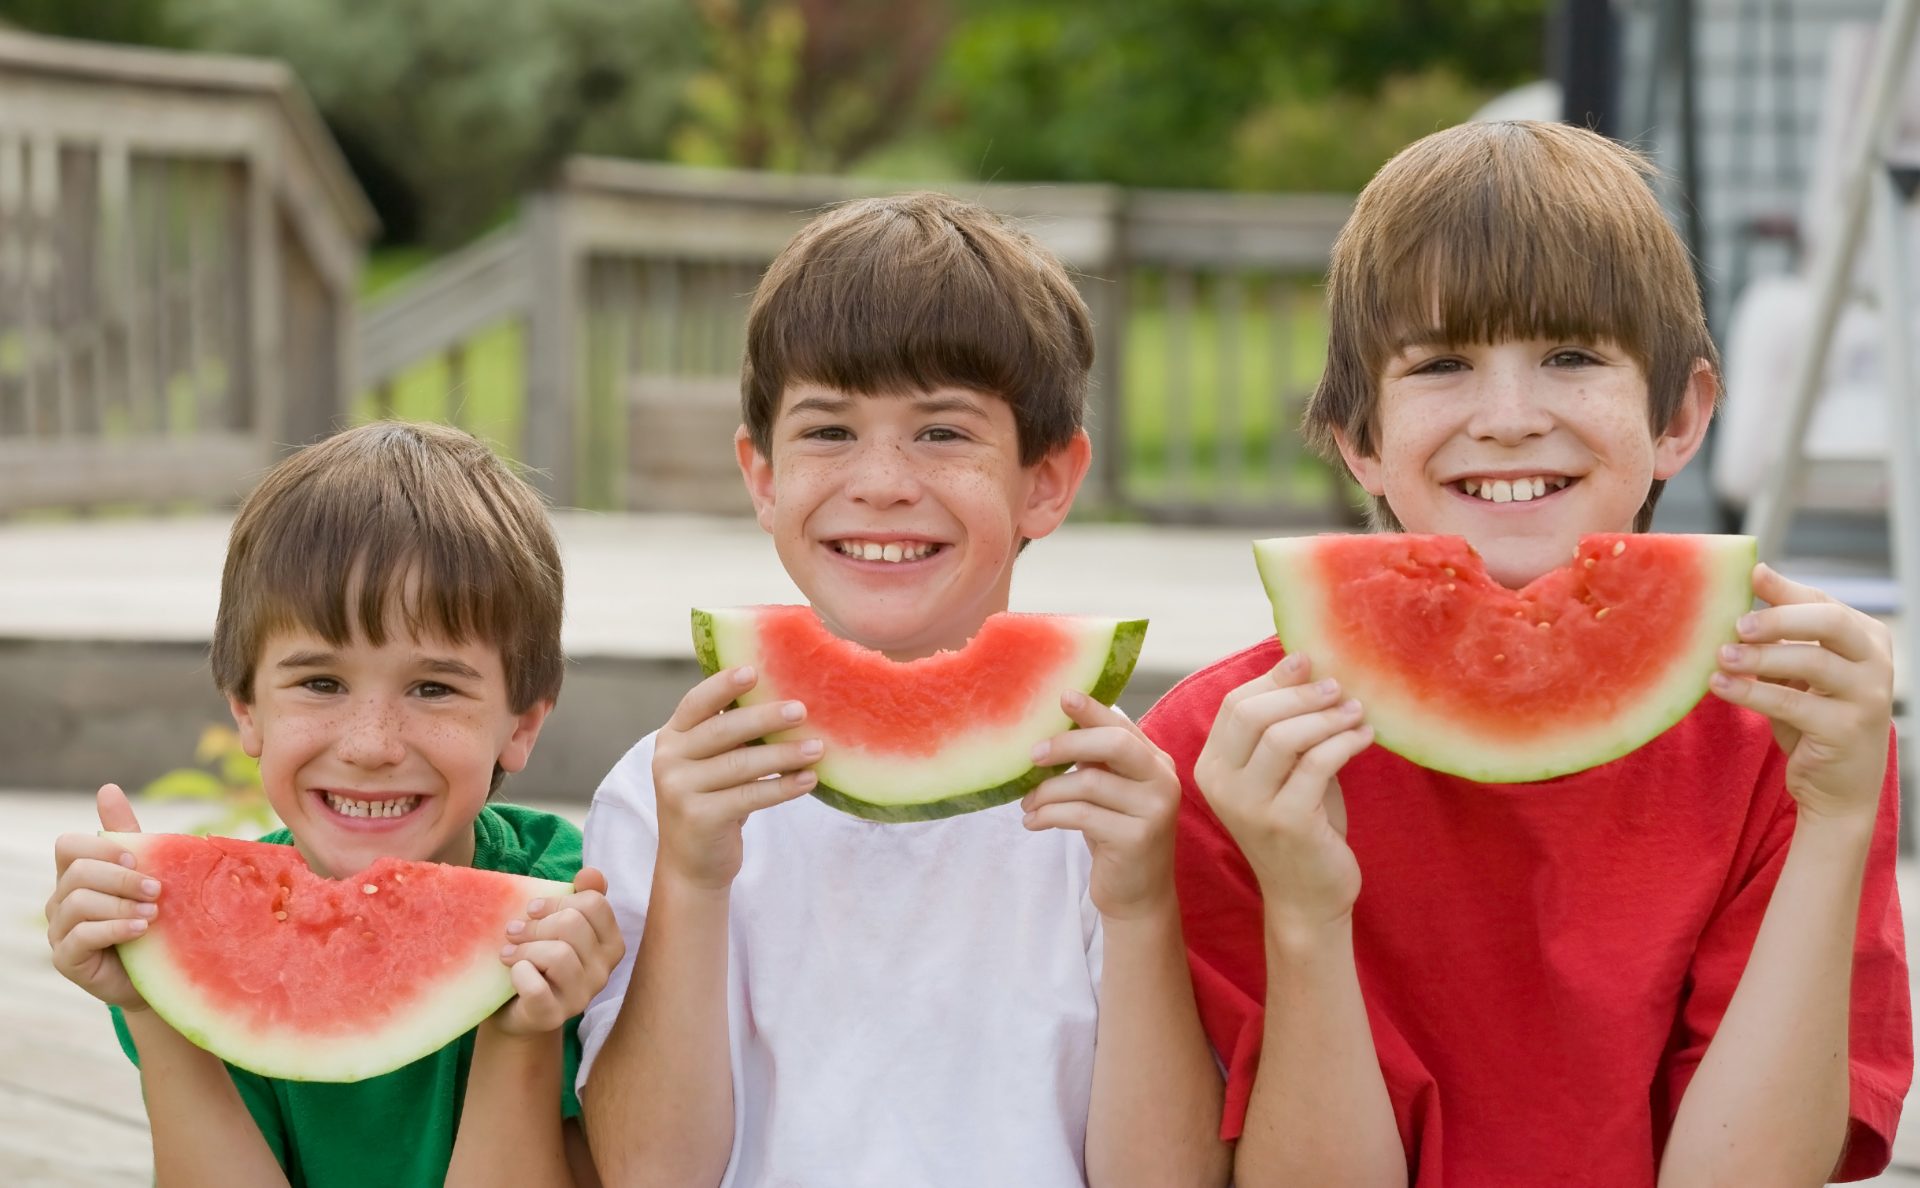 4 Fun & Unique Ways to Eat Fruit This Summer The Kidds Place